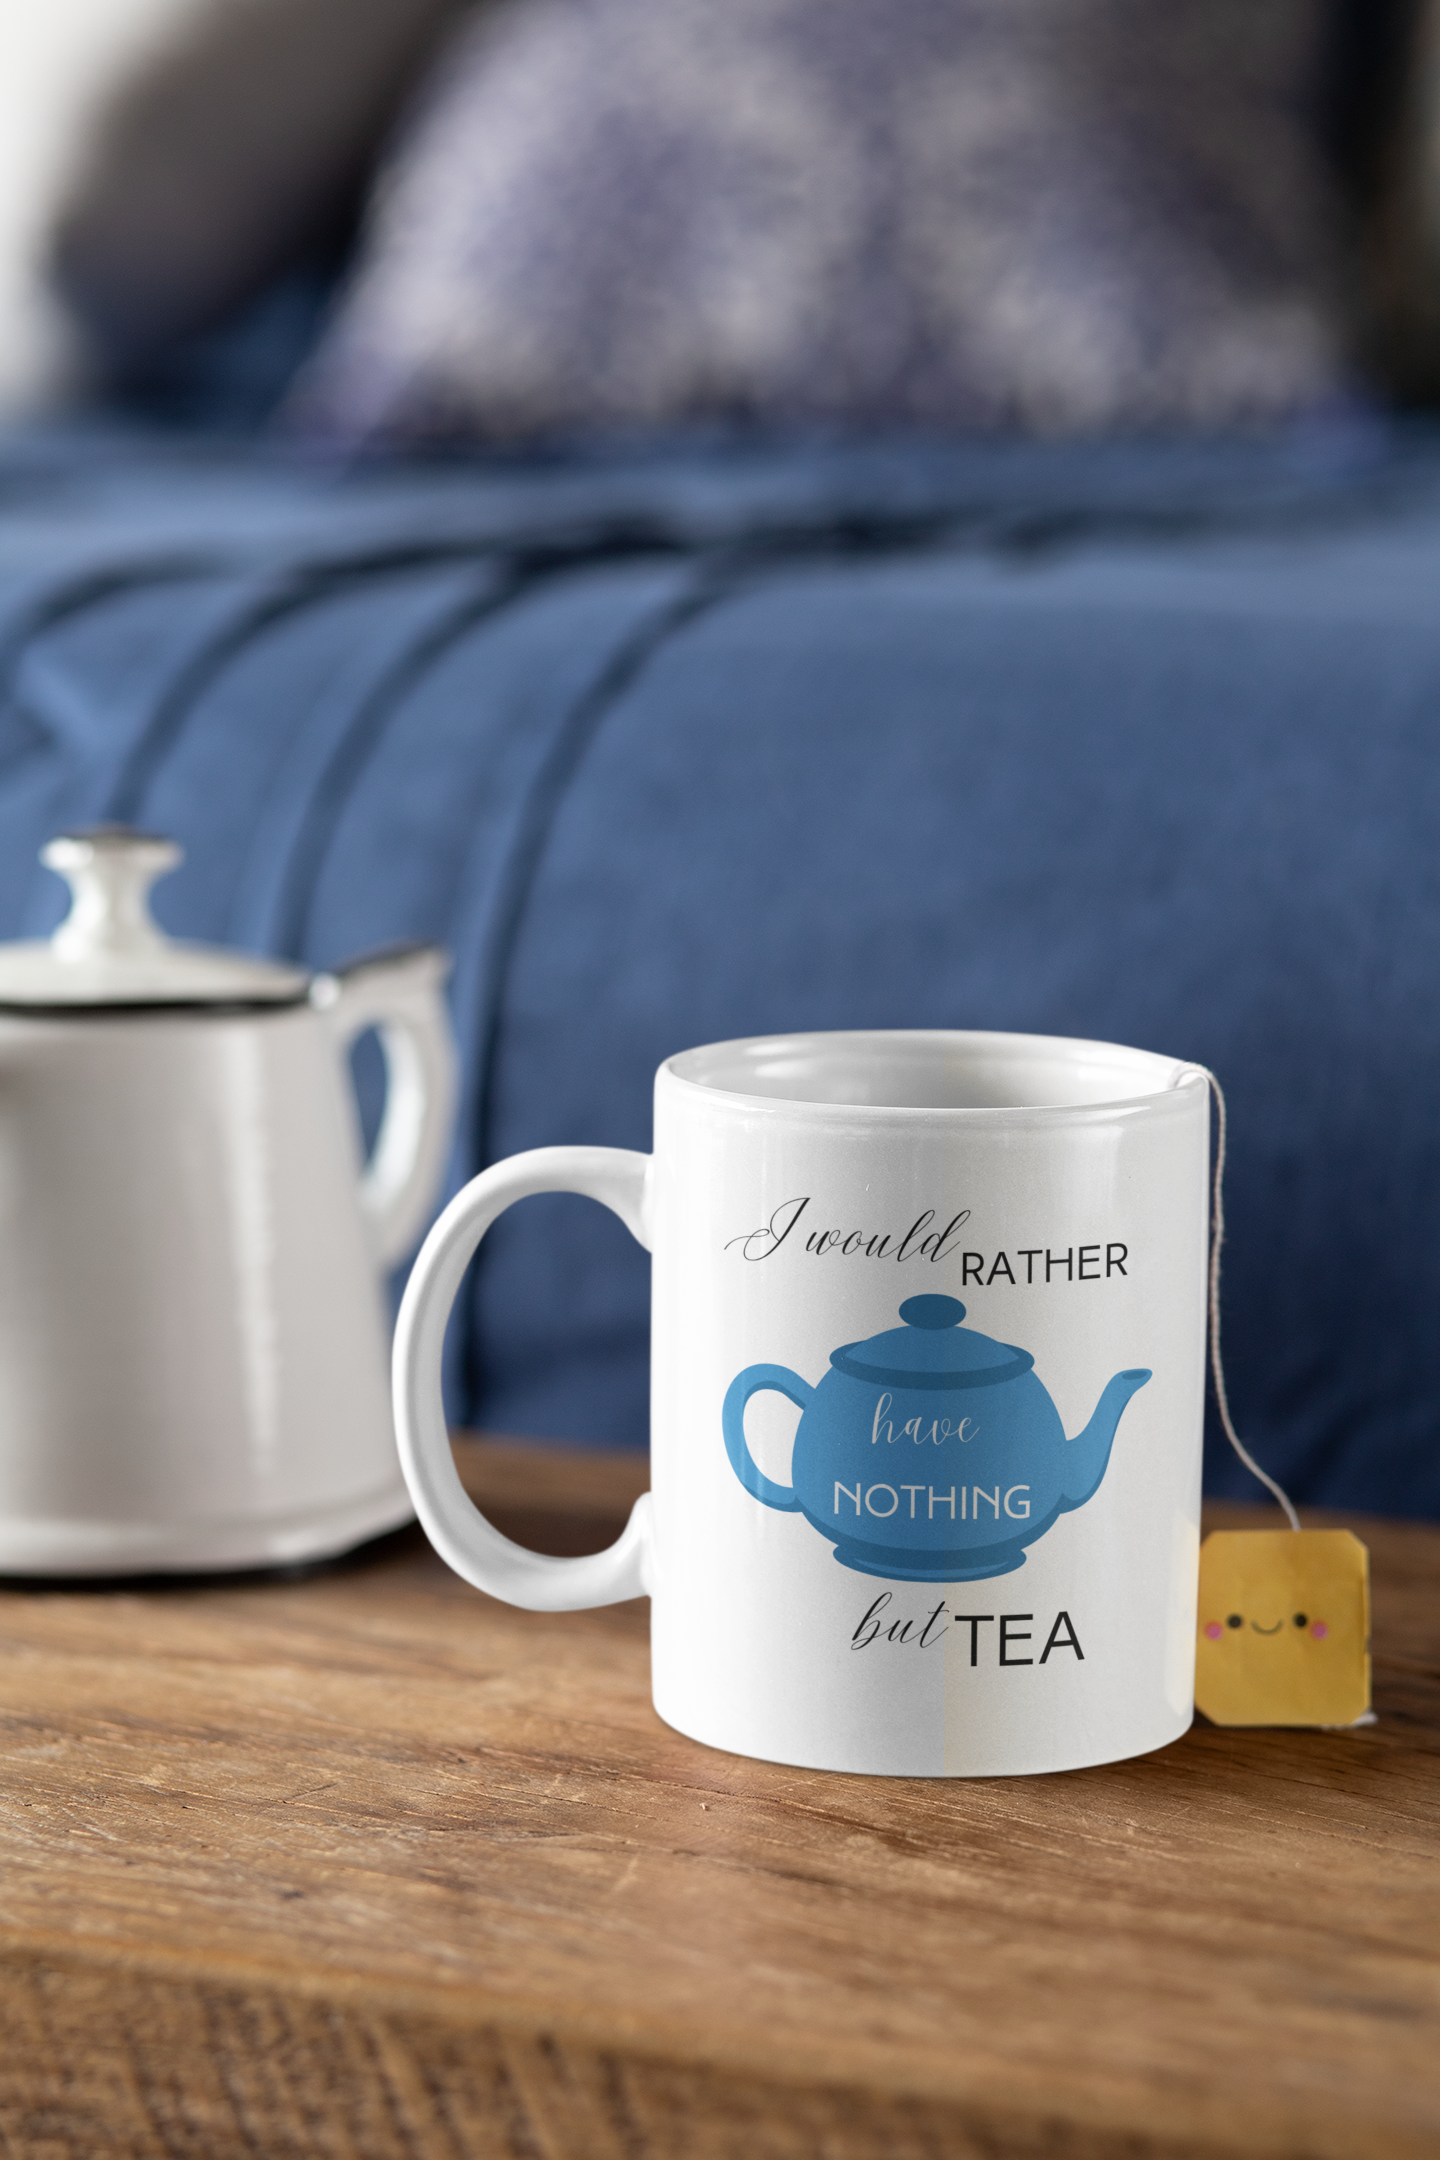 I would rather have nothing but Tea Mug